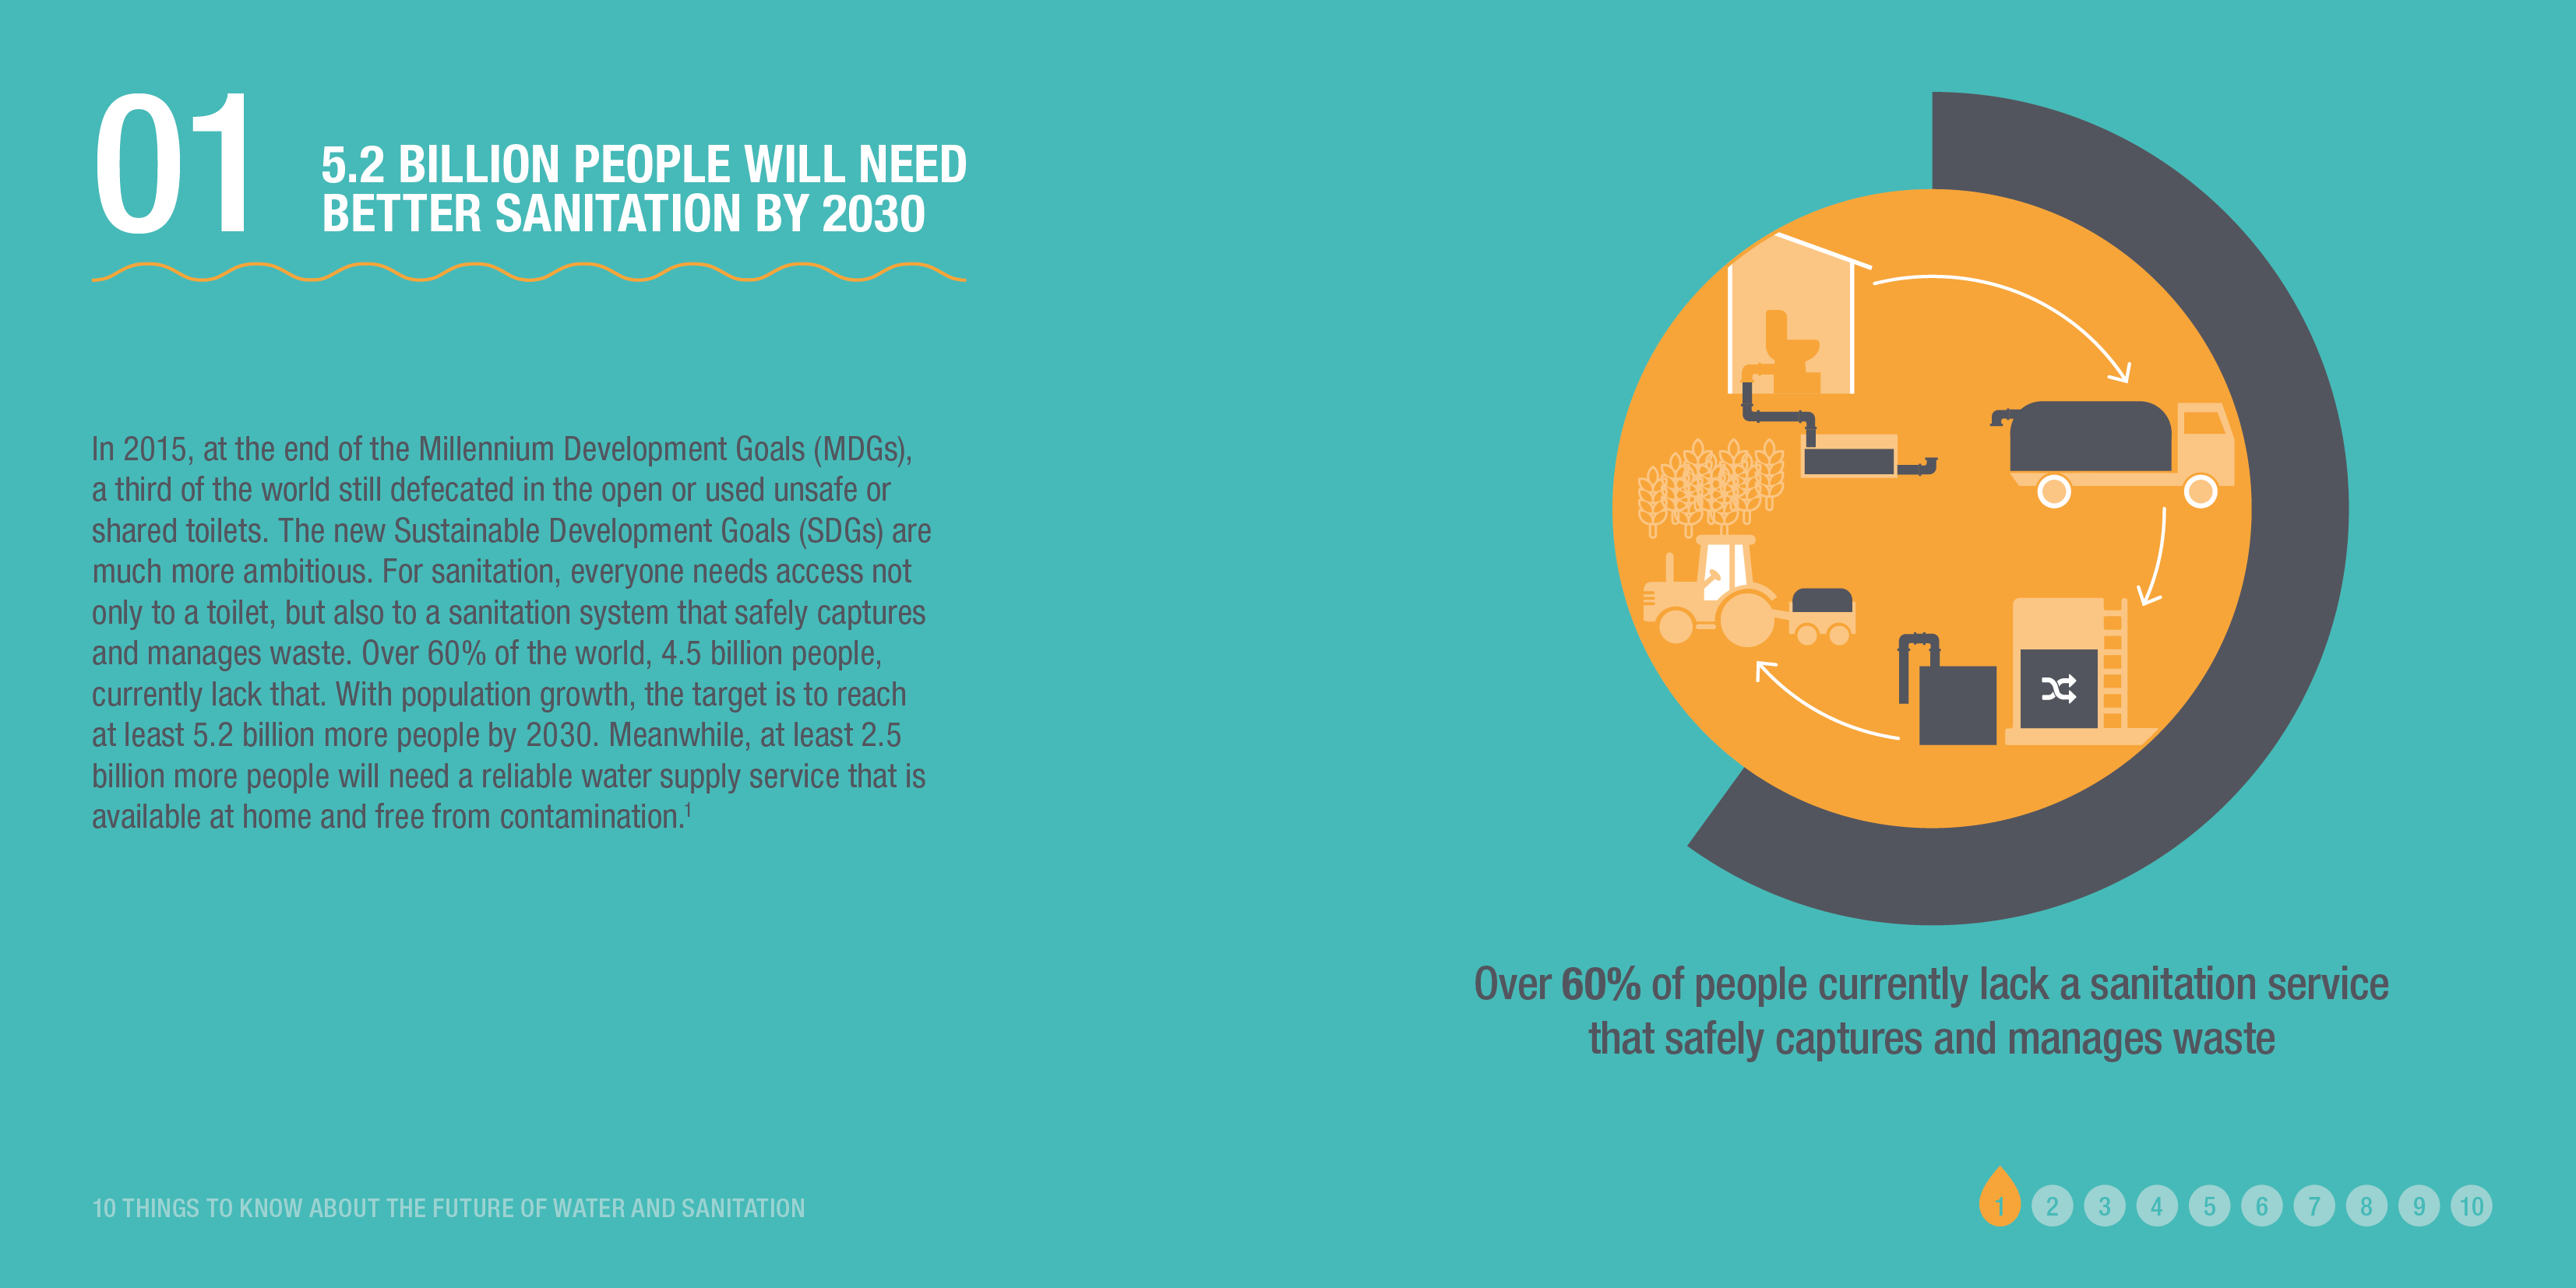 Infographic: 5.2 BILLION PEOPLE WILL NEED BETTER SANITATION BY 2030